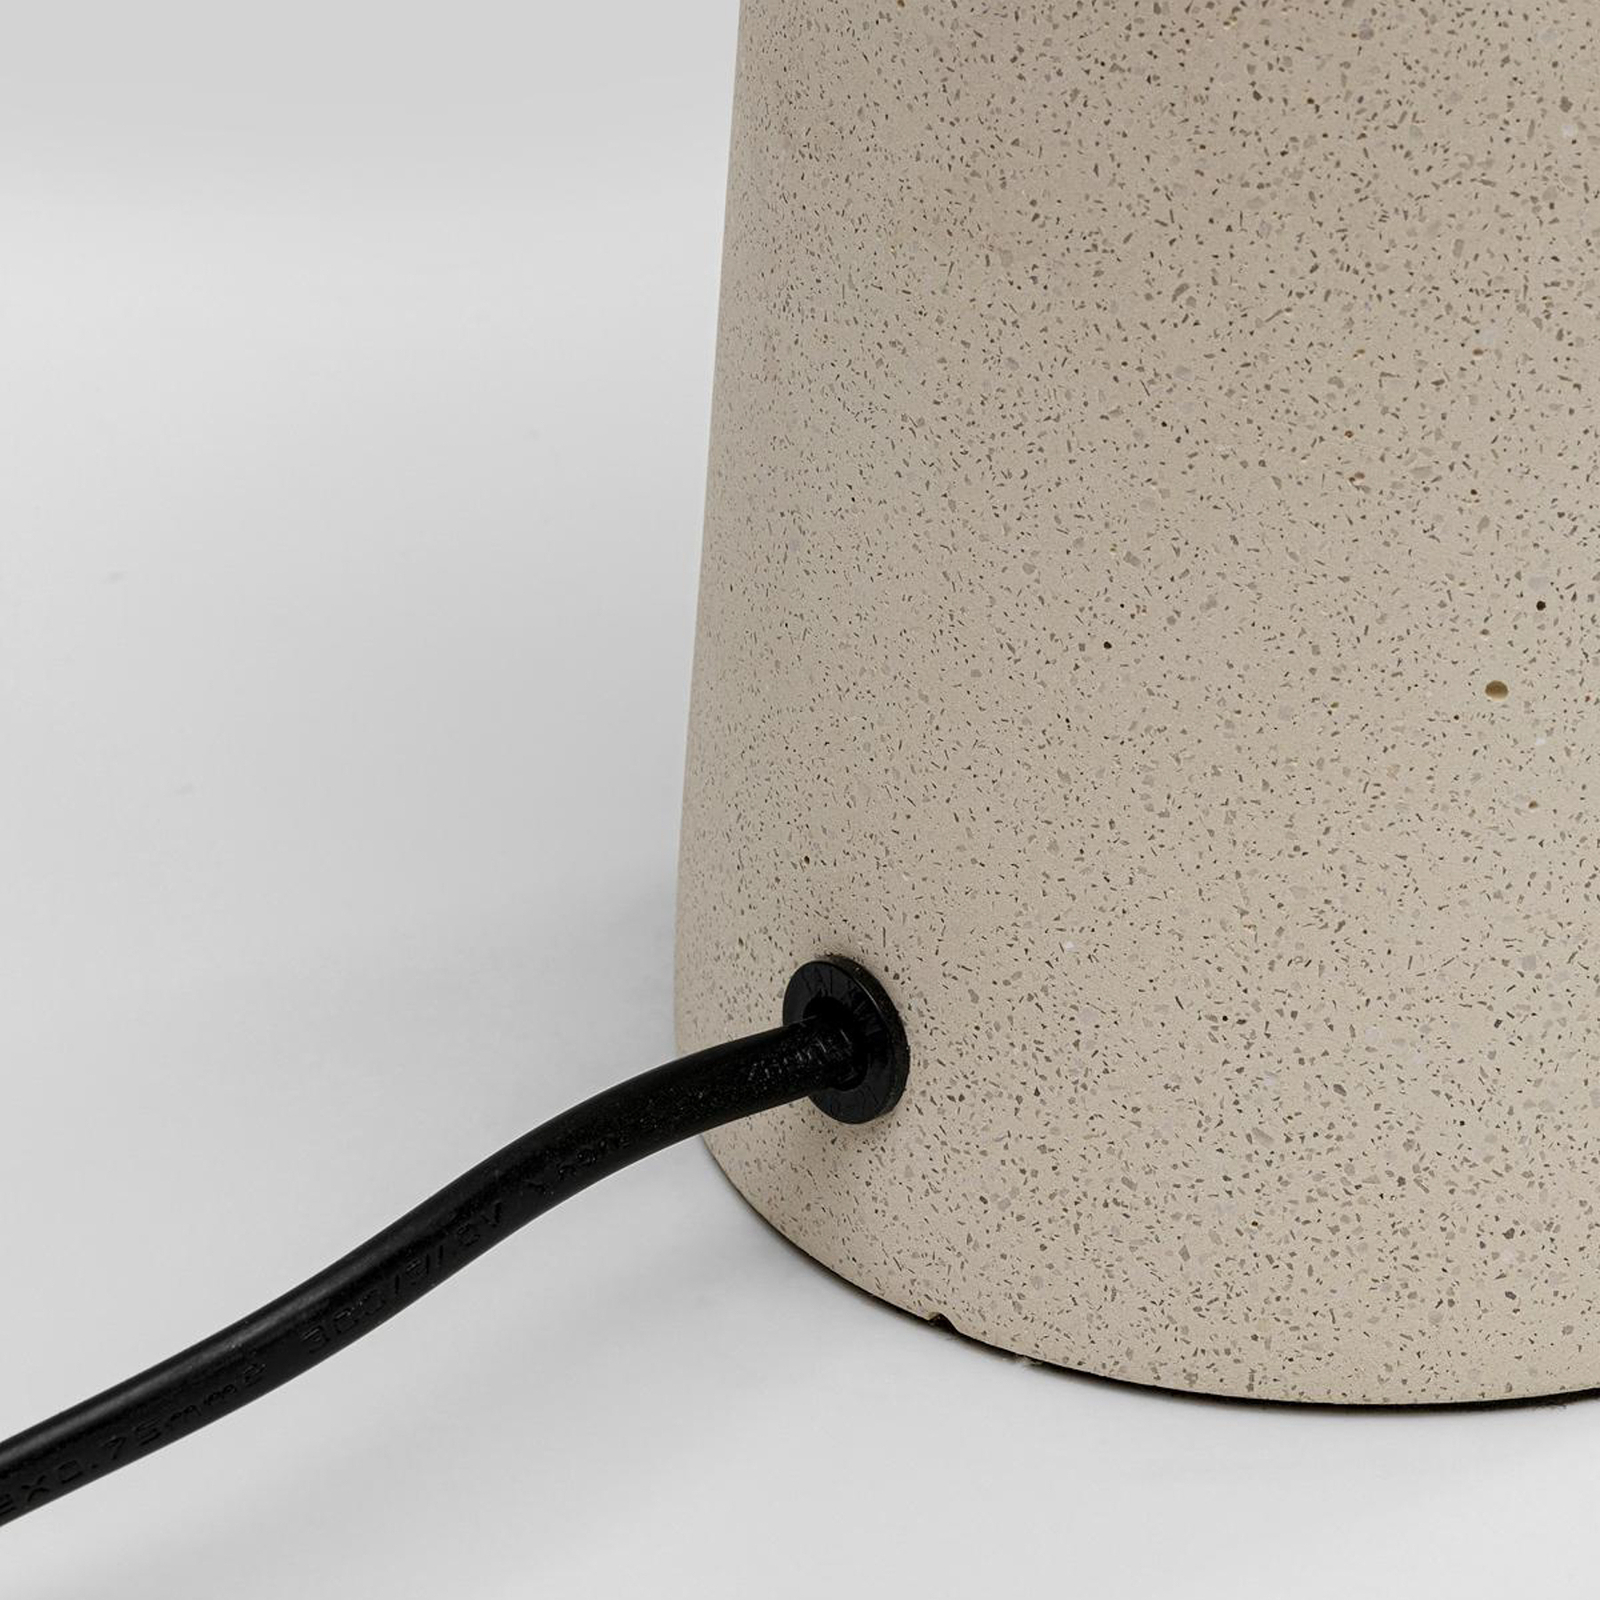 KARE table lamp Bollie, concrete base beige, opal glass height 31 cm